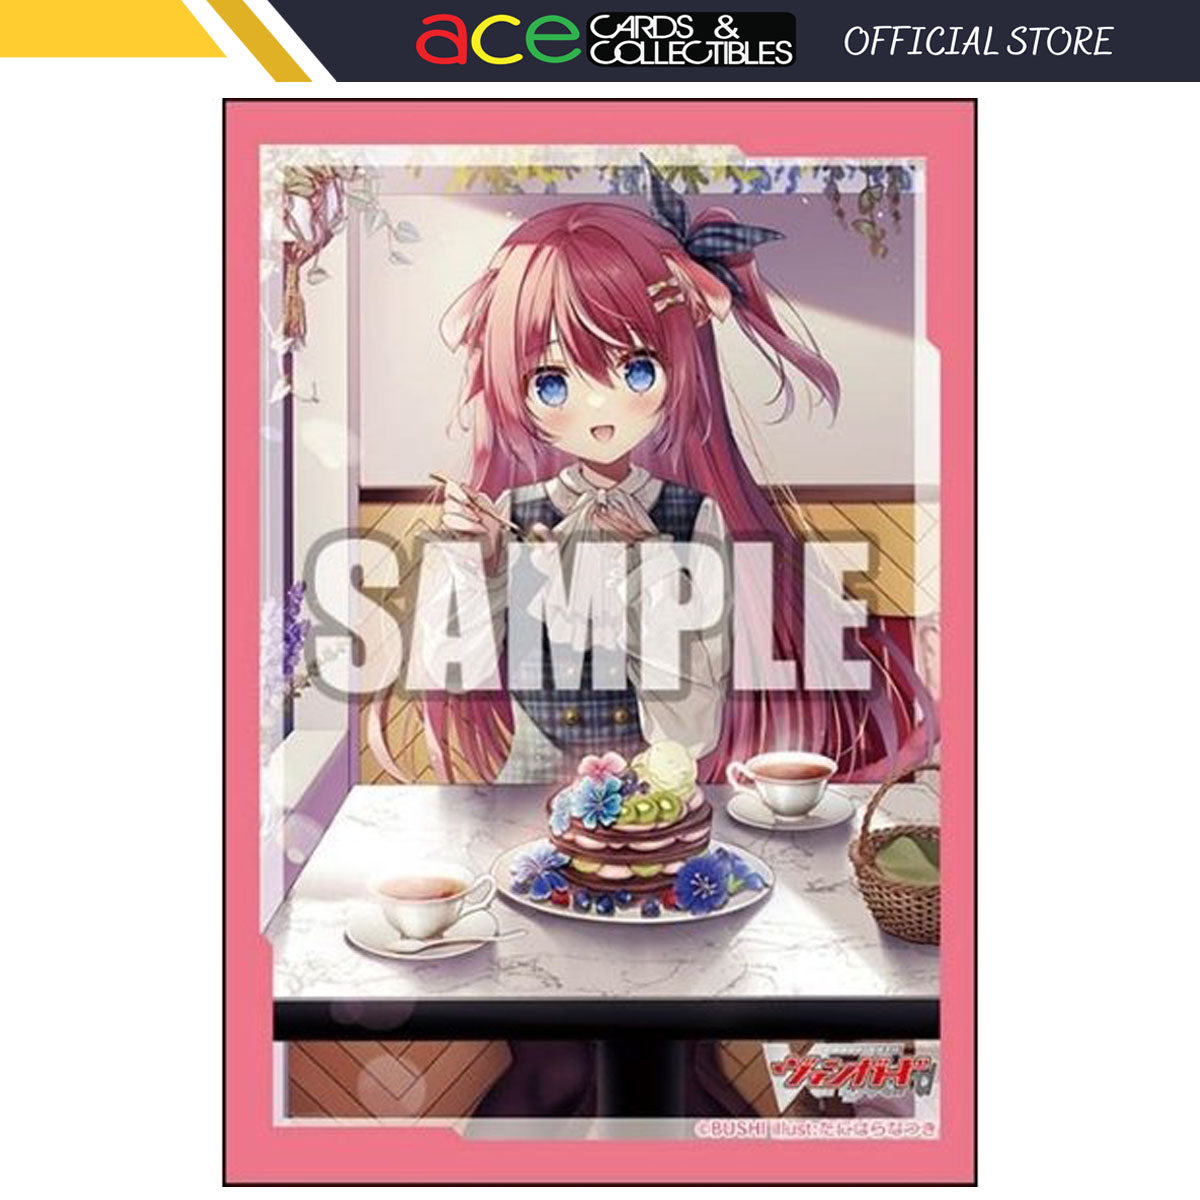 CardFight Vanguard OverDress Sleeve Collection Mini Vol. 598 "MiMish, Fortia"-Bushiroad-Ace Cards & Collectibles